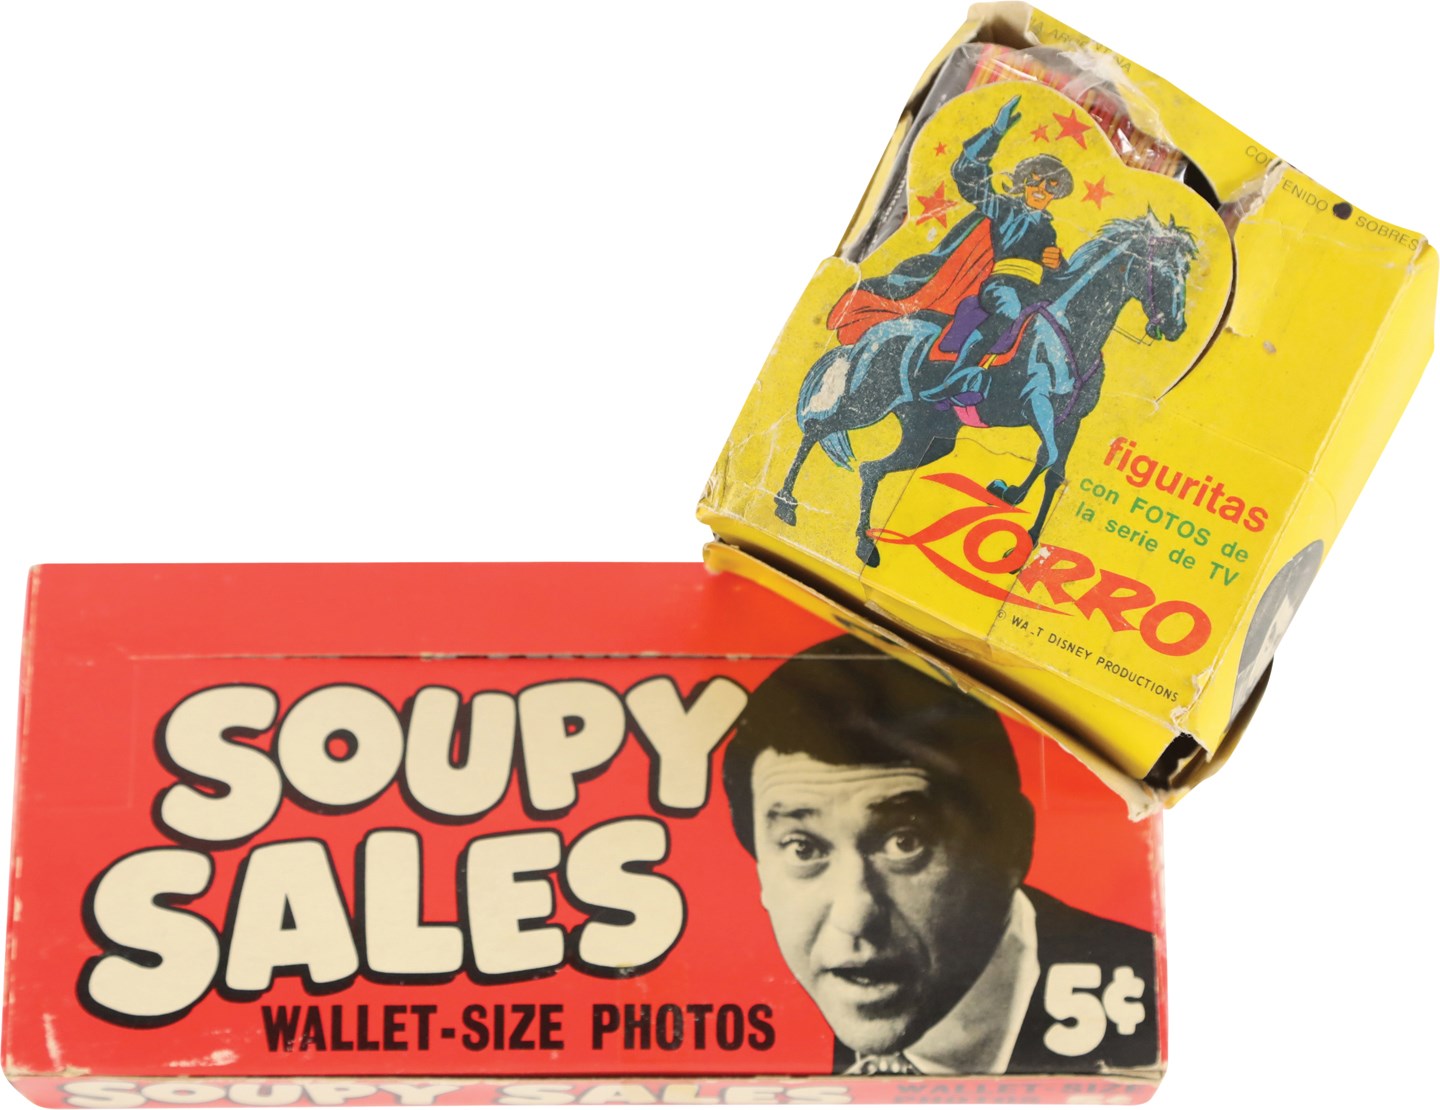 1958-1965 Topps Zorro & Soupy Sales Wax Pack Collection w/Original Display Boxes